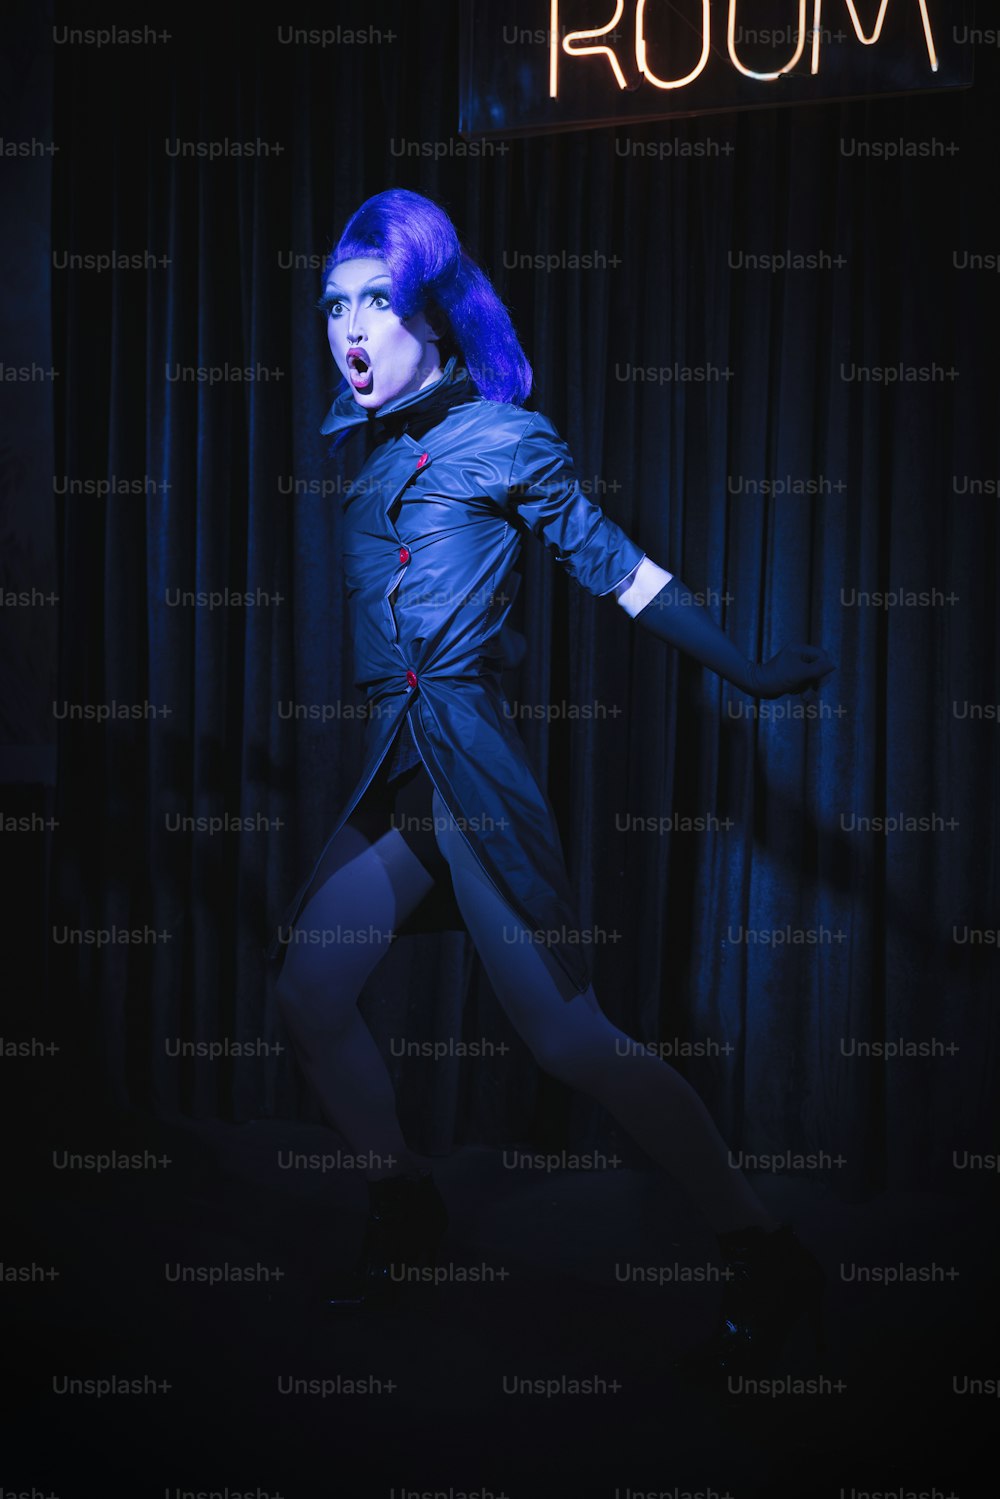 a woman with purple hair is posing in a dark room